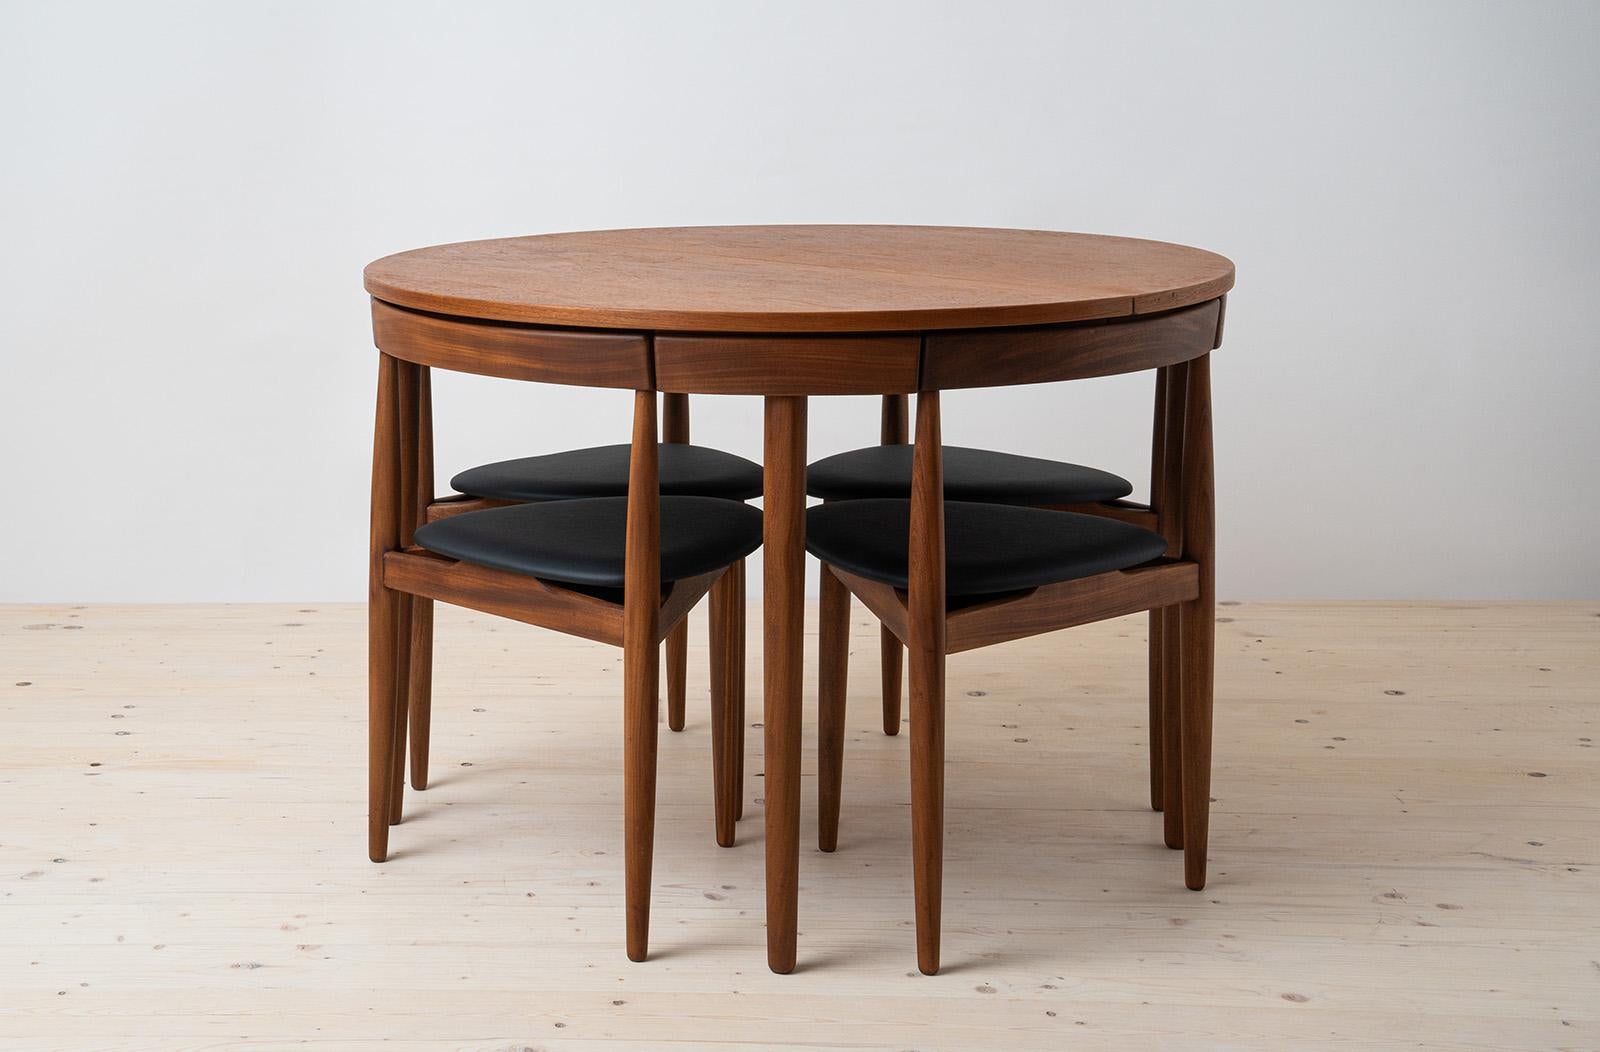 Rare “Roundette” dining set originally designed by Hans Olsen in 1952 for Frem Røjle this dining set has since become an icon of classic Danish Mid Century Modern design. This gorgeous dining set features an extendable teak wood round table and four